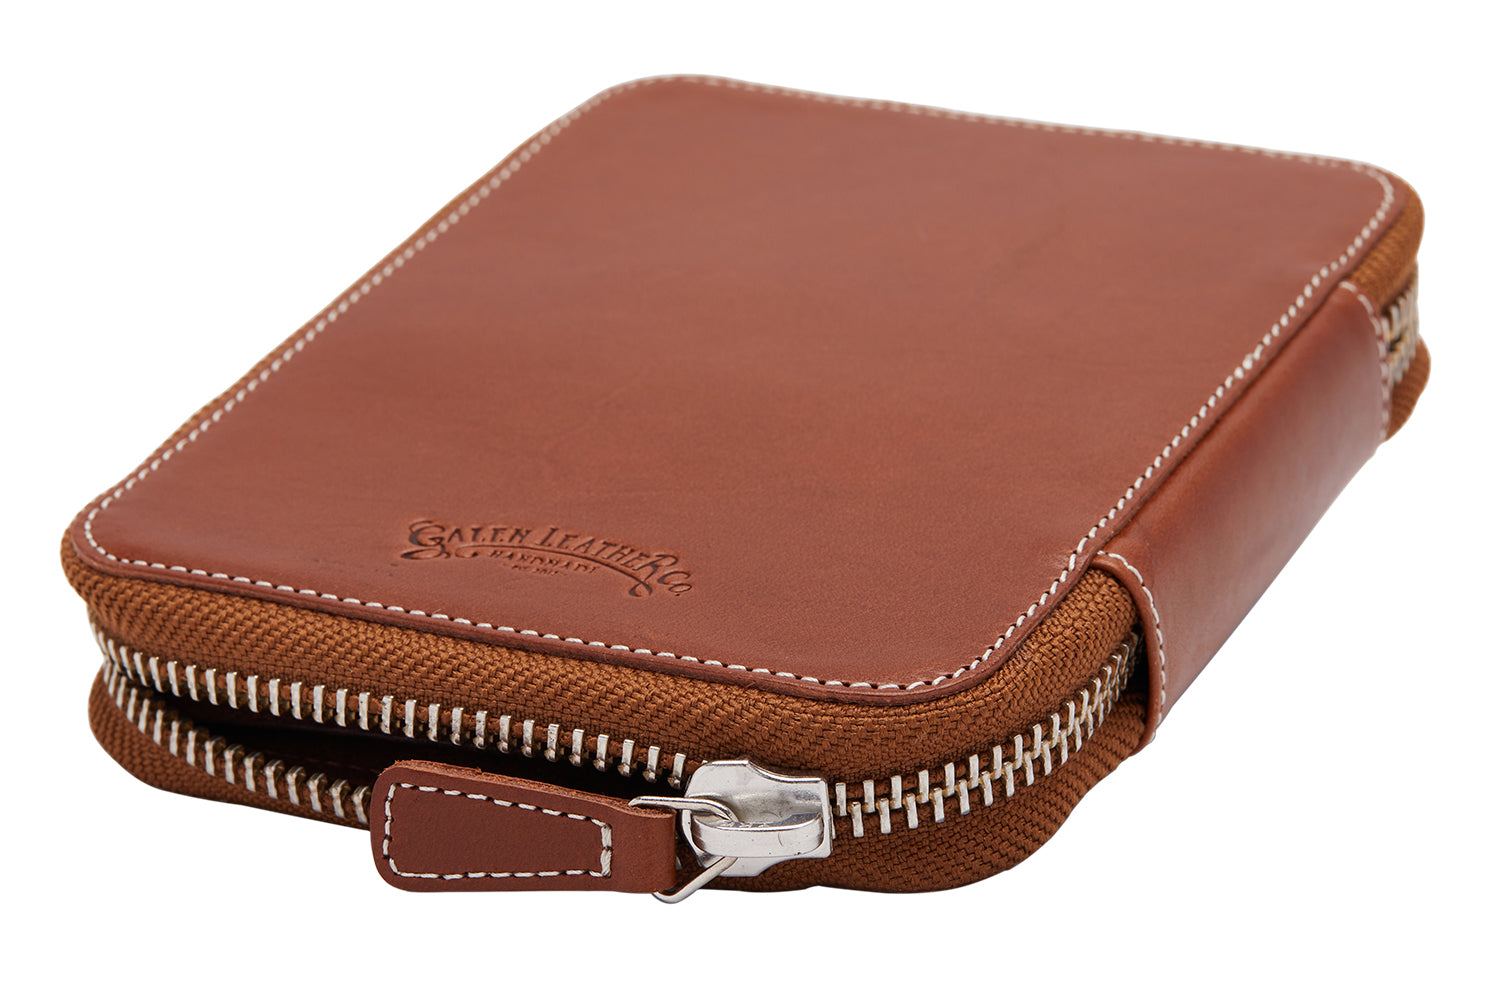 Galen Leather Zippered 10 Slot Pen Case - Brown - The Pen Company